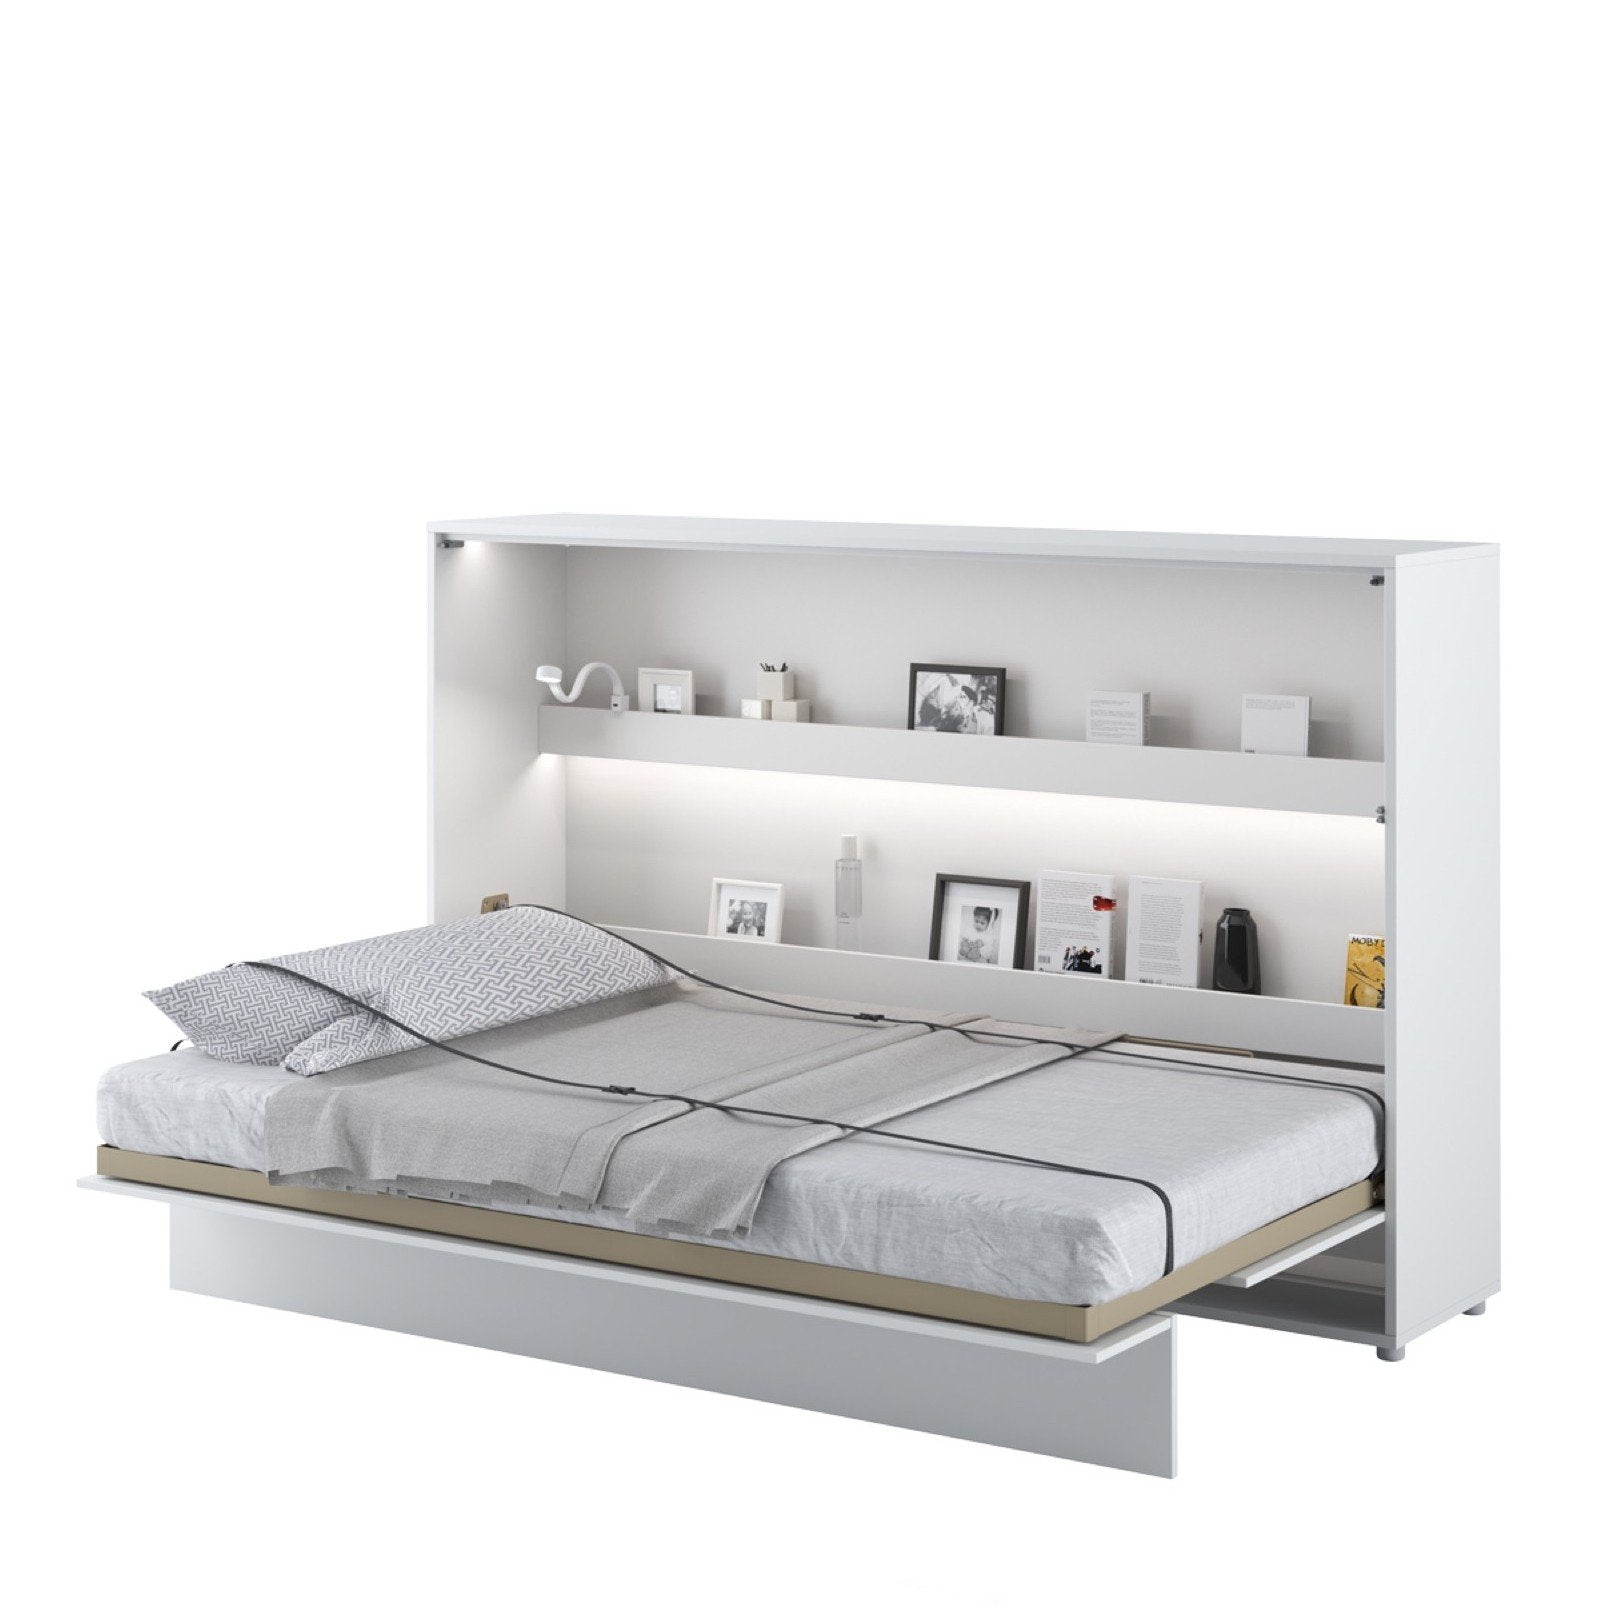 View BC05 Horizontal Wall Bed Concept 120cm Murphy Bed White Gloss 120 x 200cm information